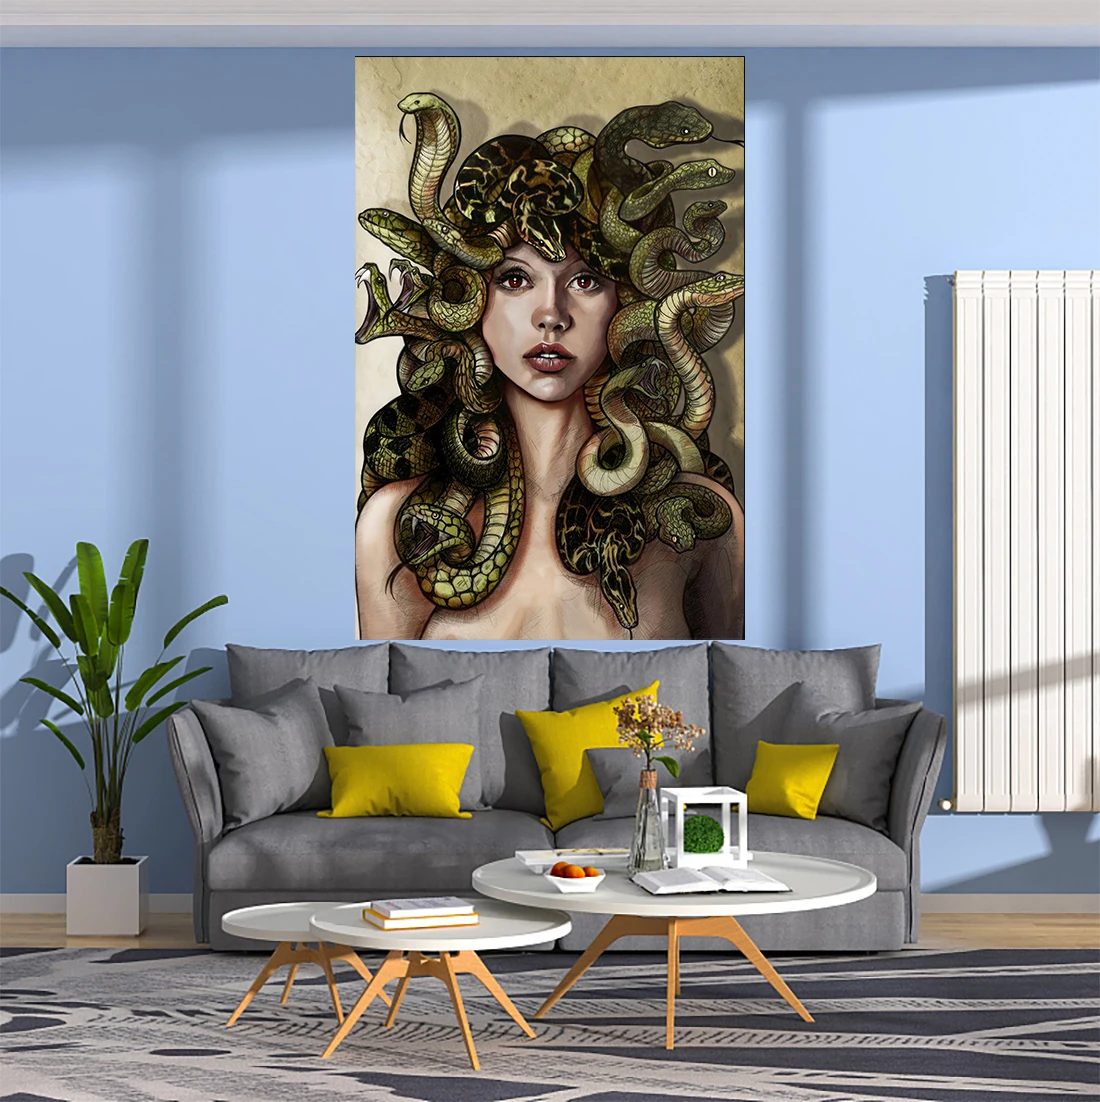 

XxDeco Psychedelic Tapestry Horror Demon Snake Queen Medusa Printed Wall Hanging Carpets Bedroom Or Home For Decoration